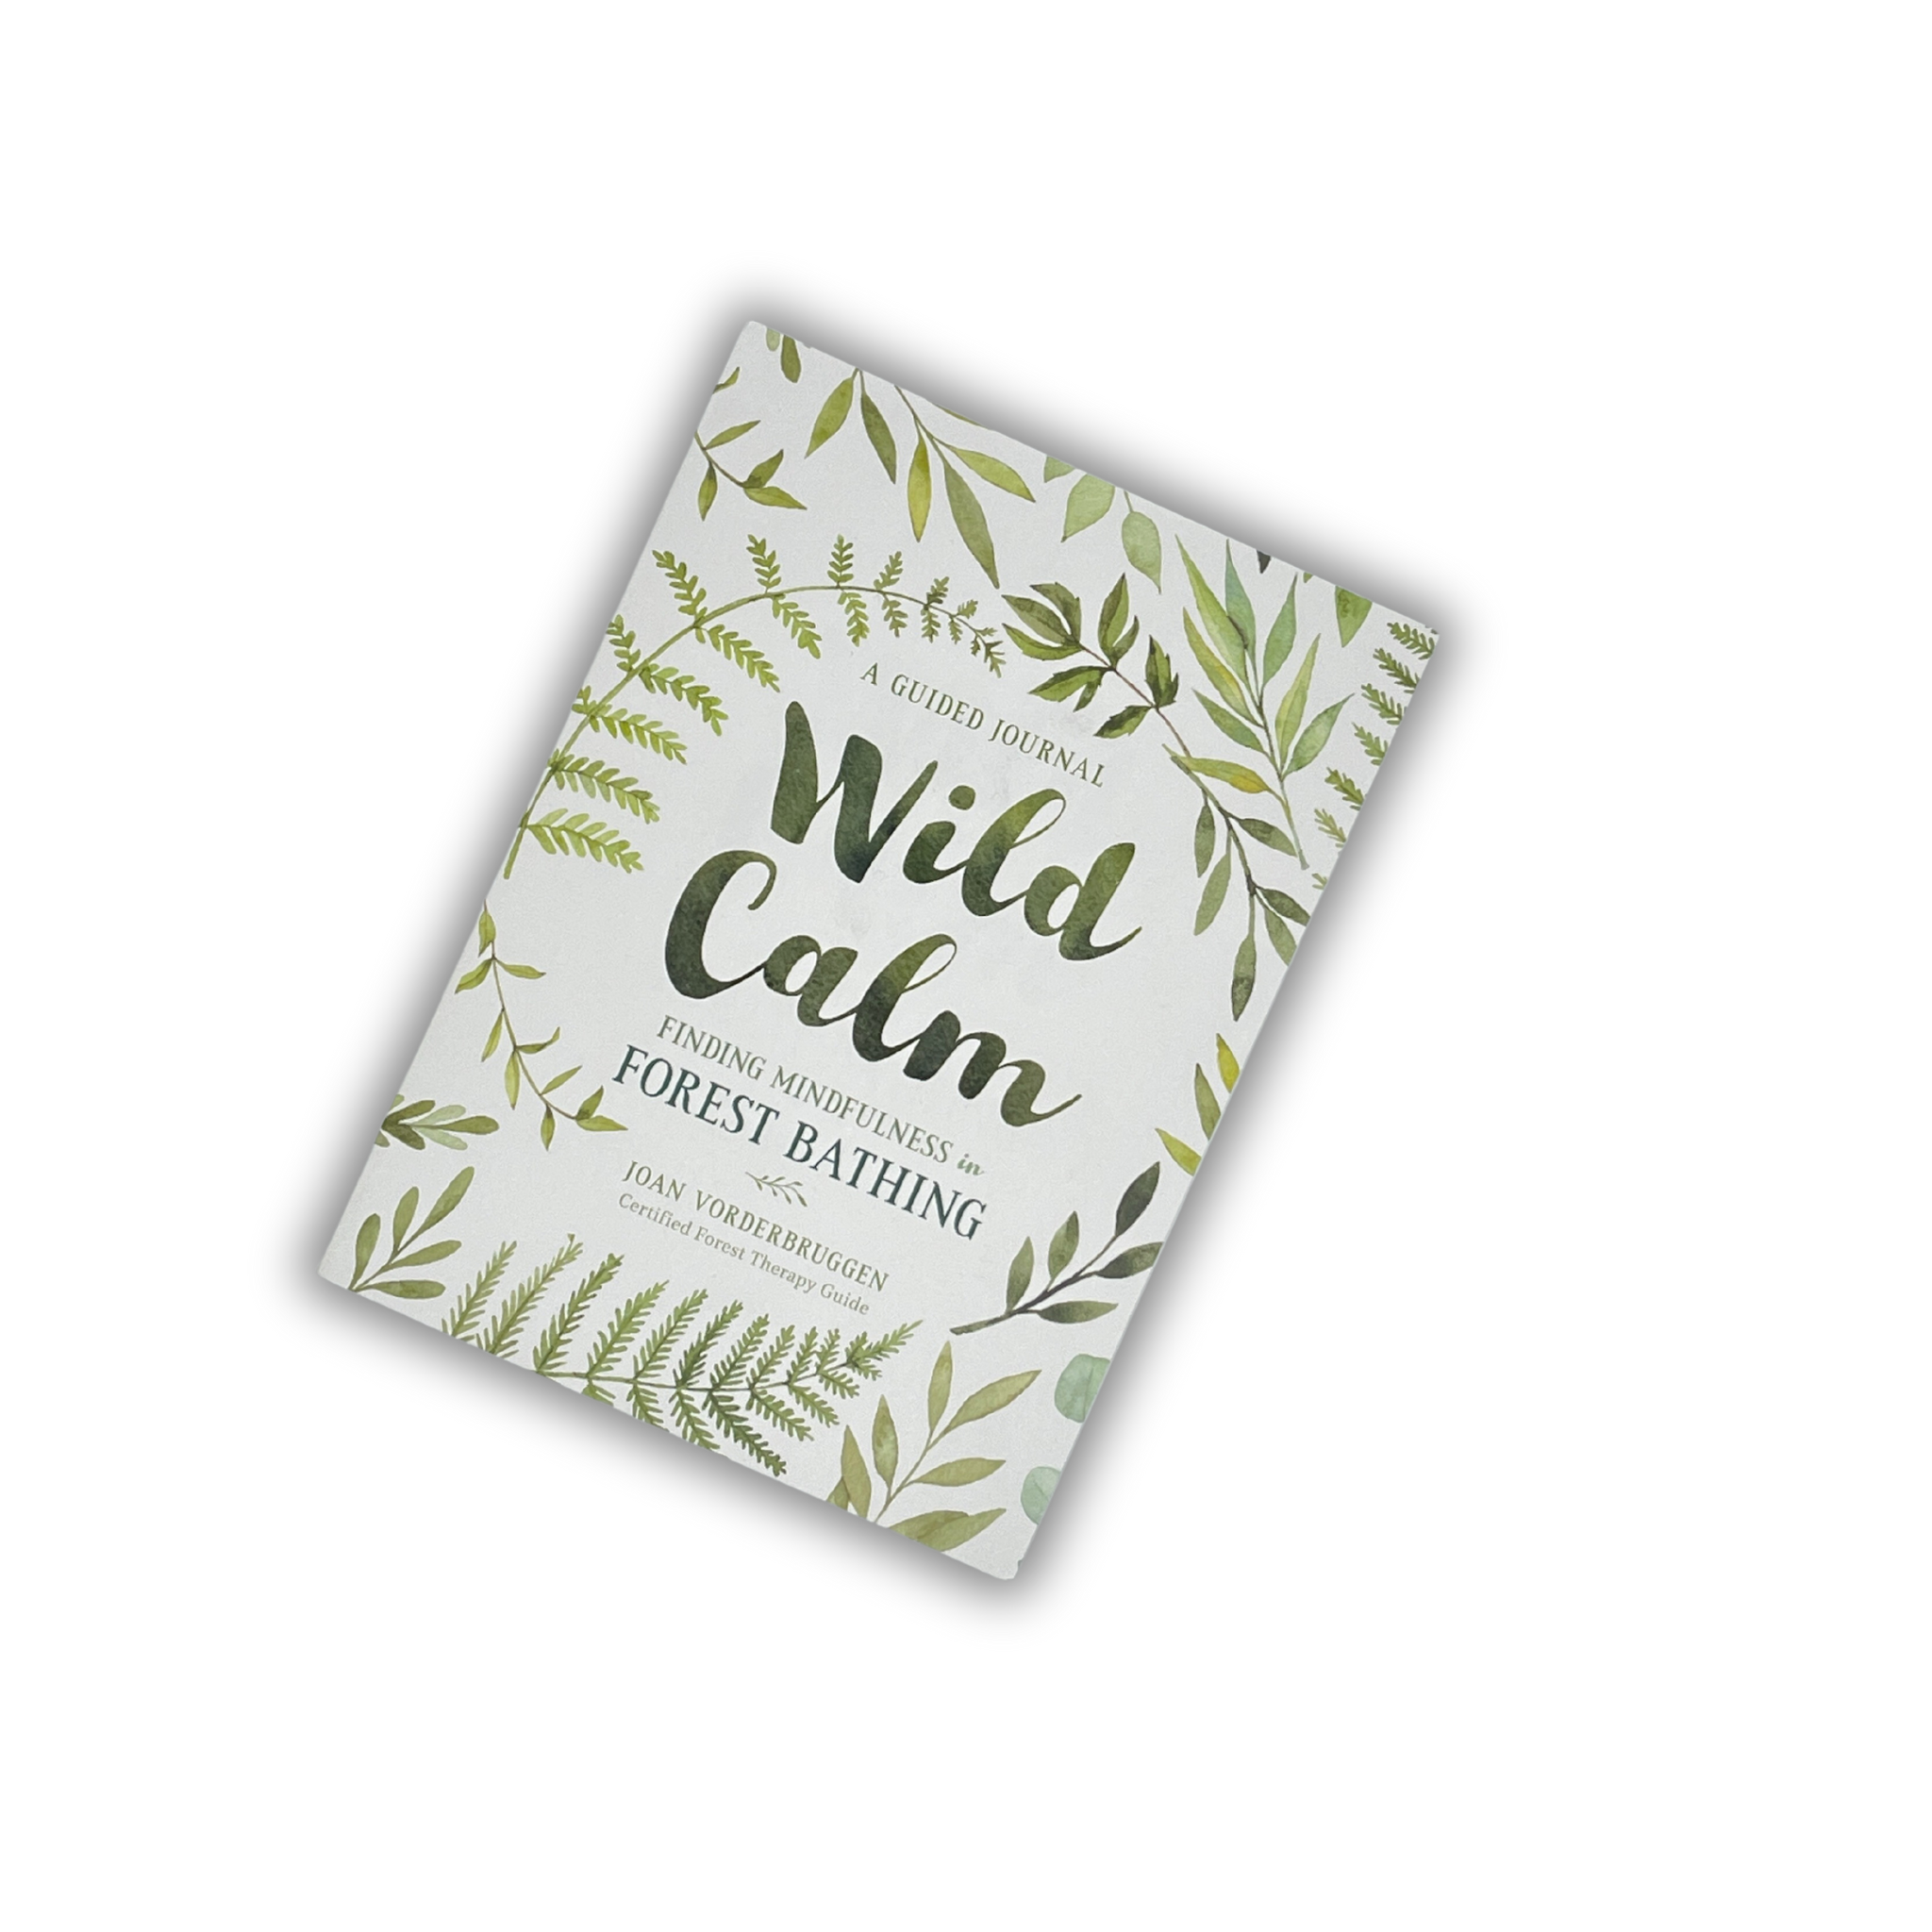 Wild Calm Forest Bathing Guided Journal